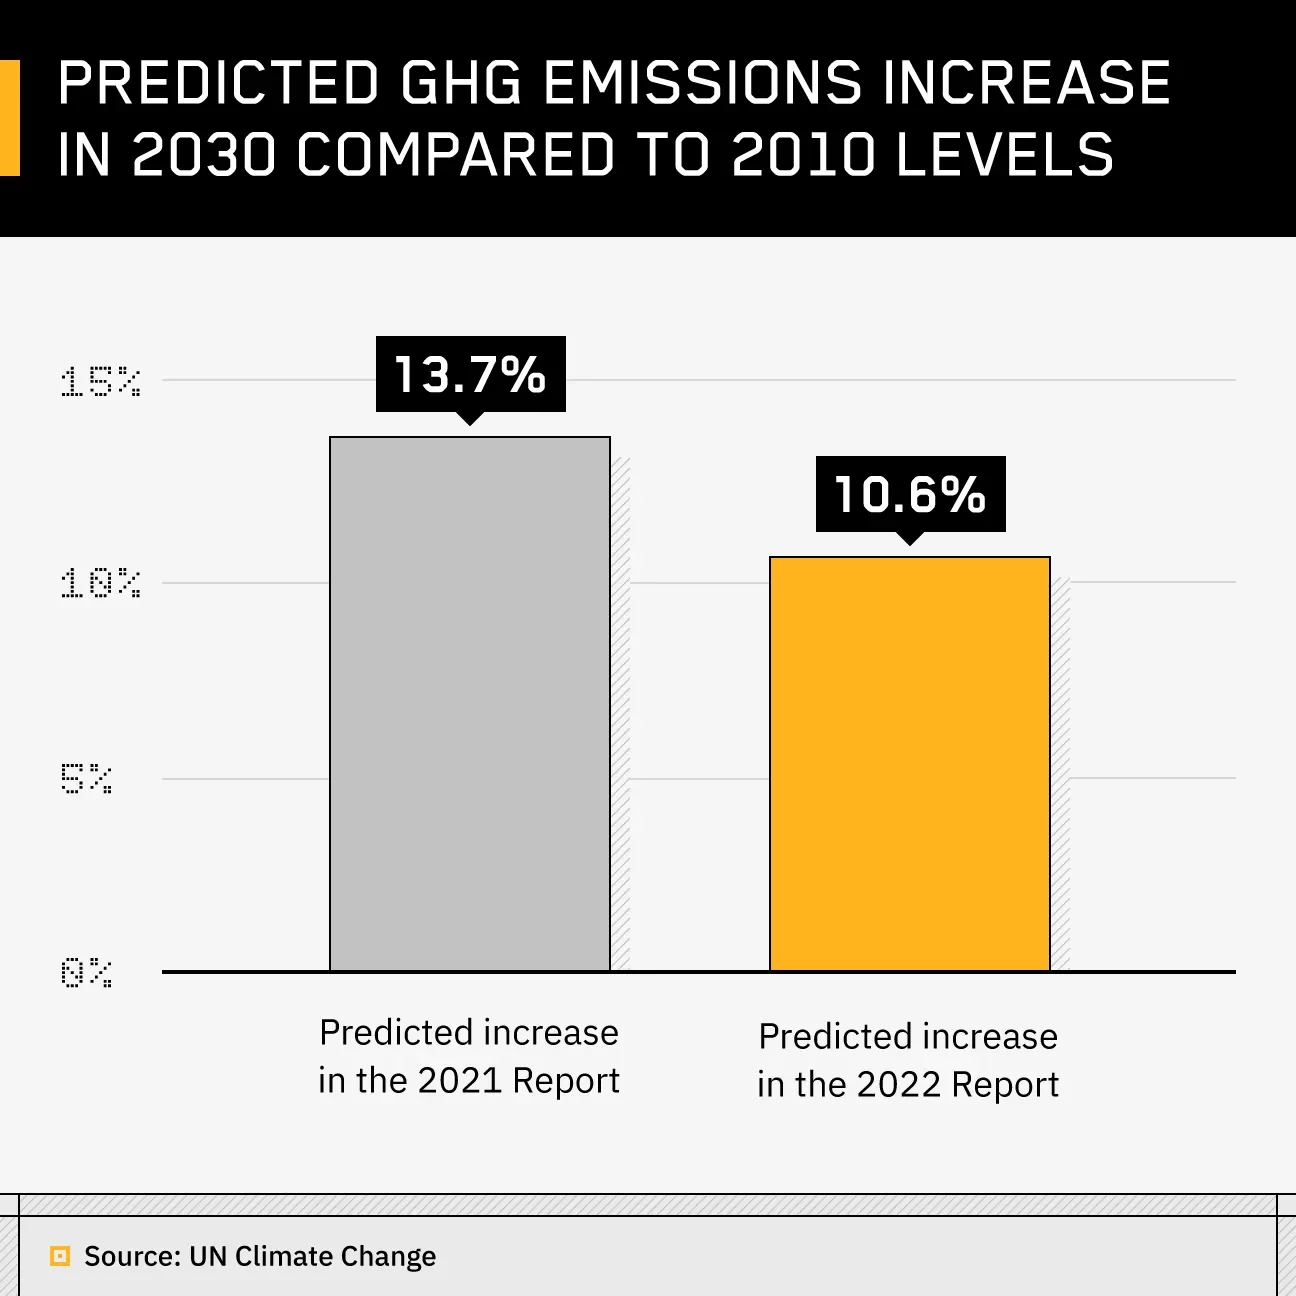 vertical bar chart depicting predicted greenhouse gas emissions increase in 2030 compared to 2010 levels for 2021 and 2022